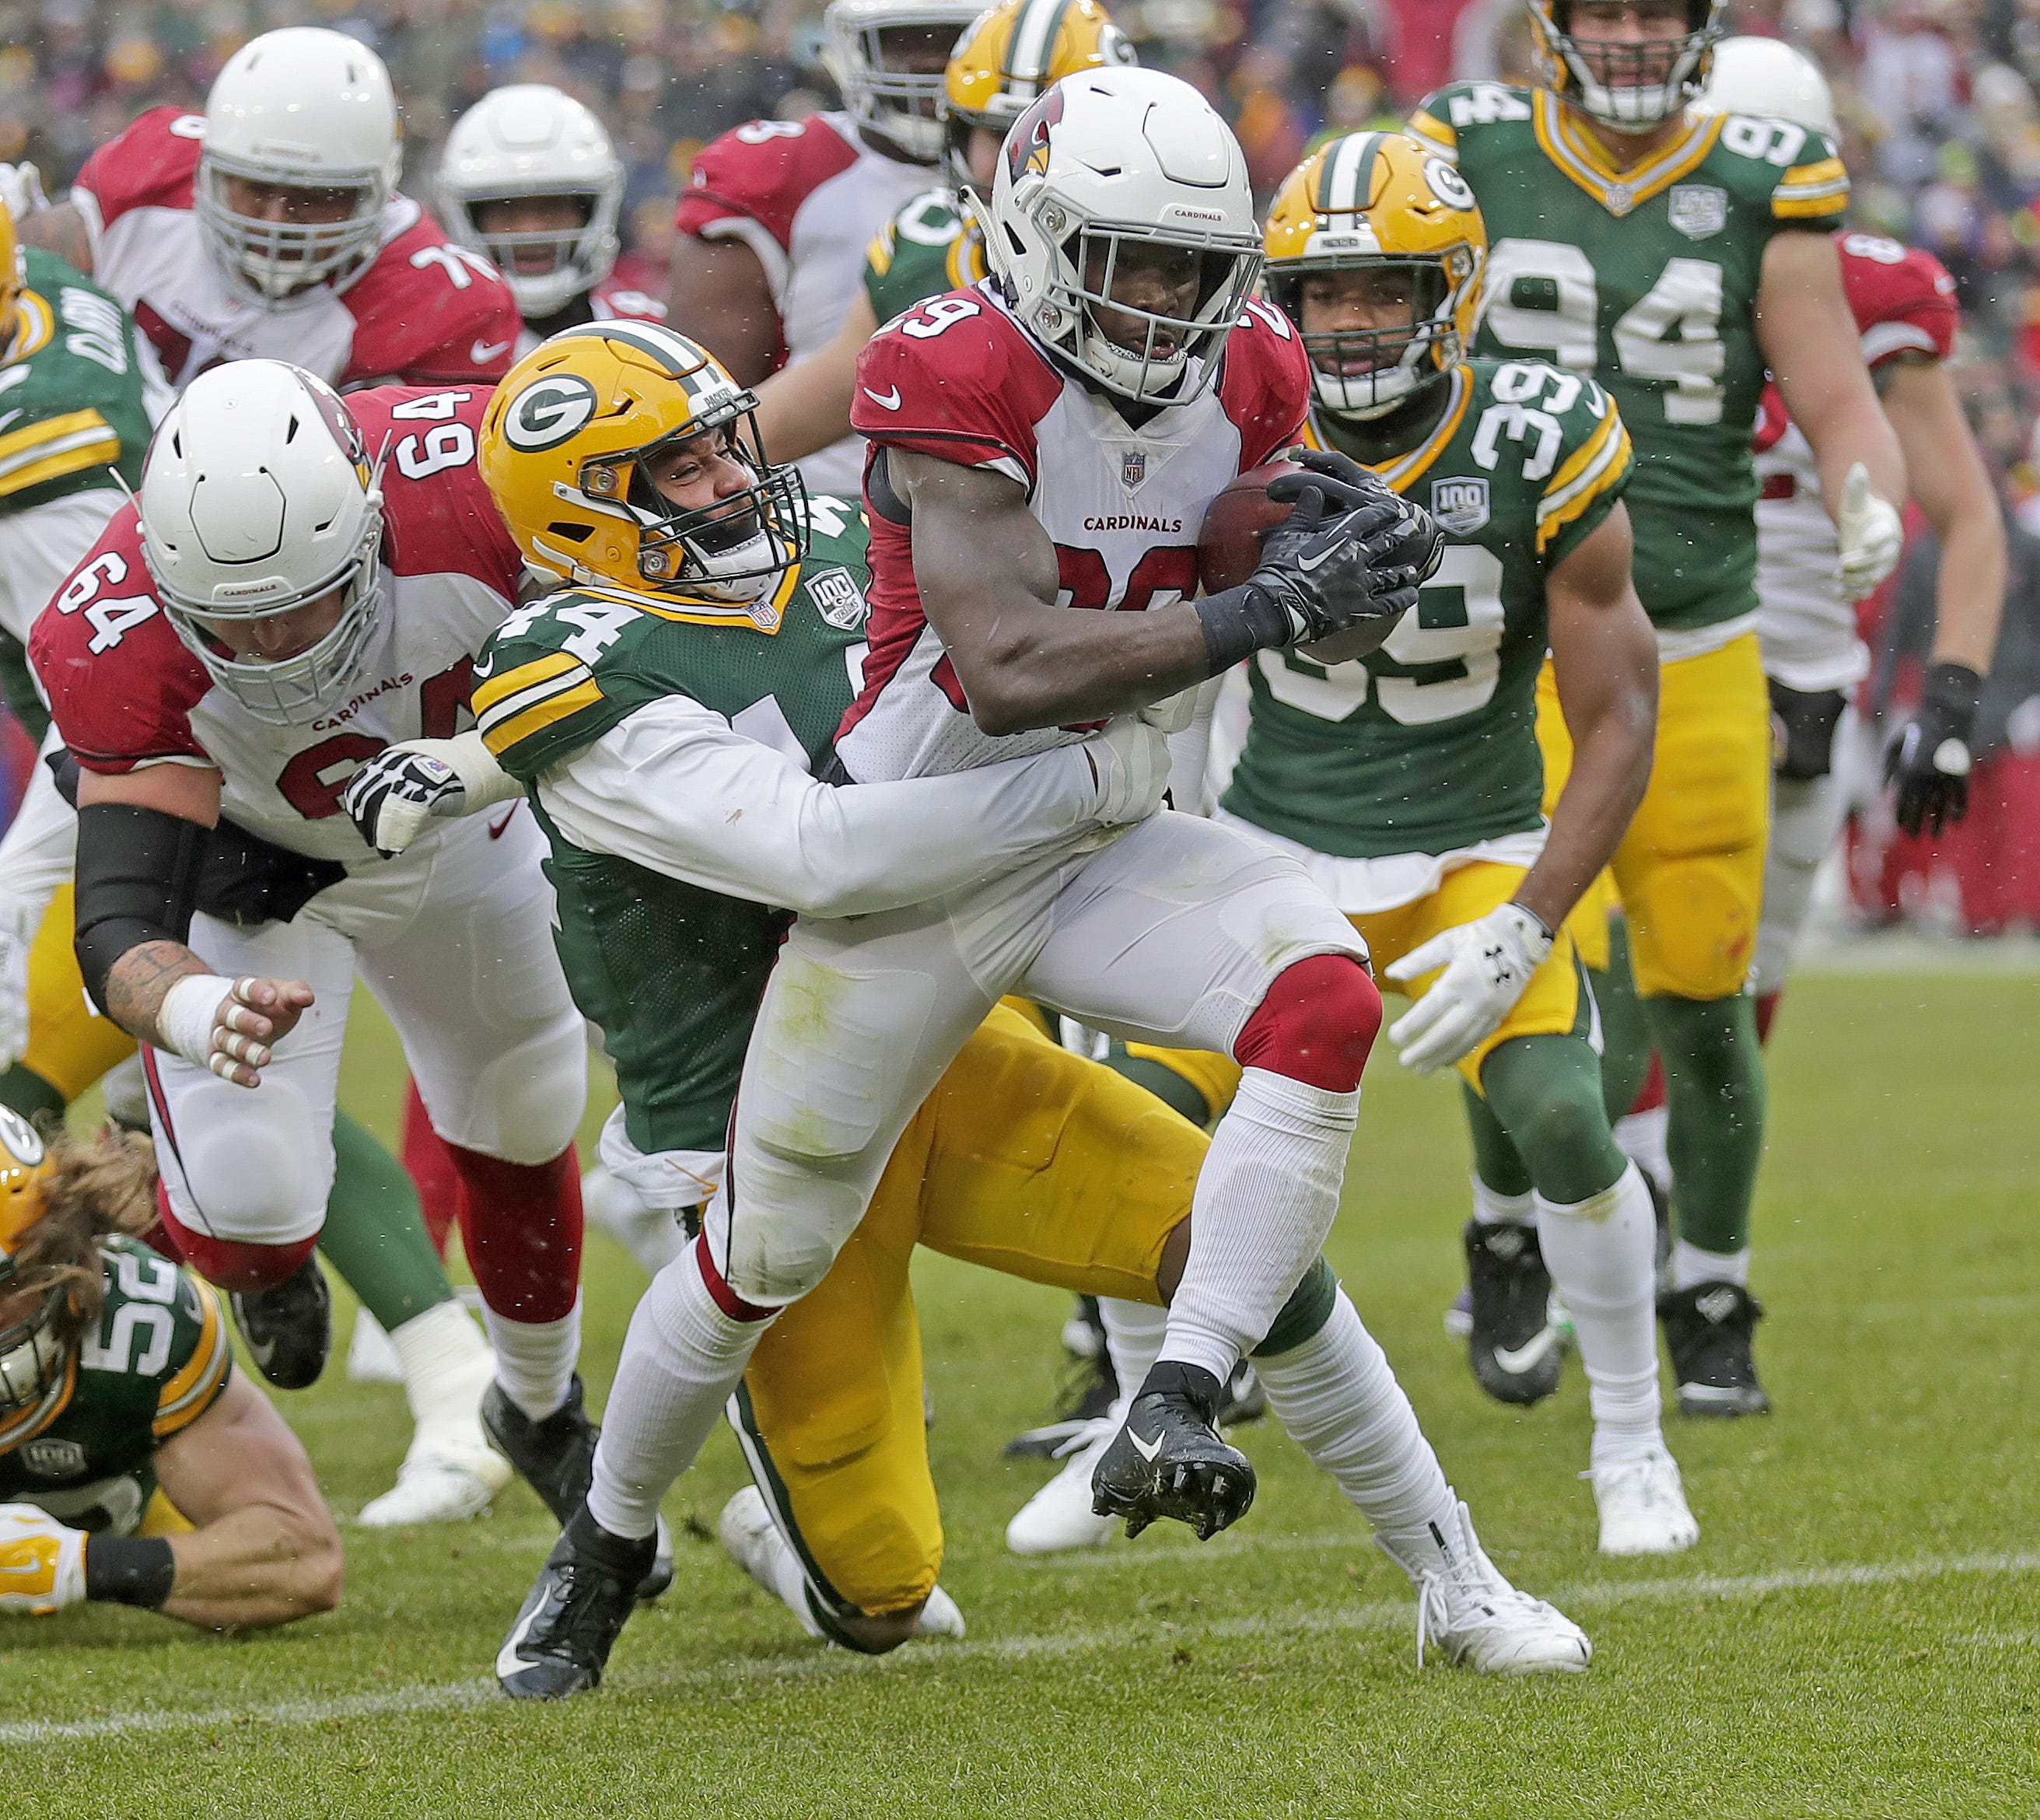 Green Bay Packers inside linebacker Antonio Morrison (44) is carried into the end zone by Arizona Cardinals running back Chase Edmonds (29) against the Arizona Cardinals Sunday, December 2, 2018 at Lambeau Field in Green Bay, Wis.
Jim Matthews/USA TODAY NETWORK-Wis